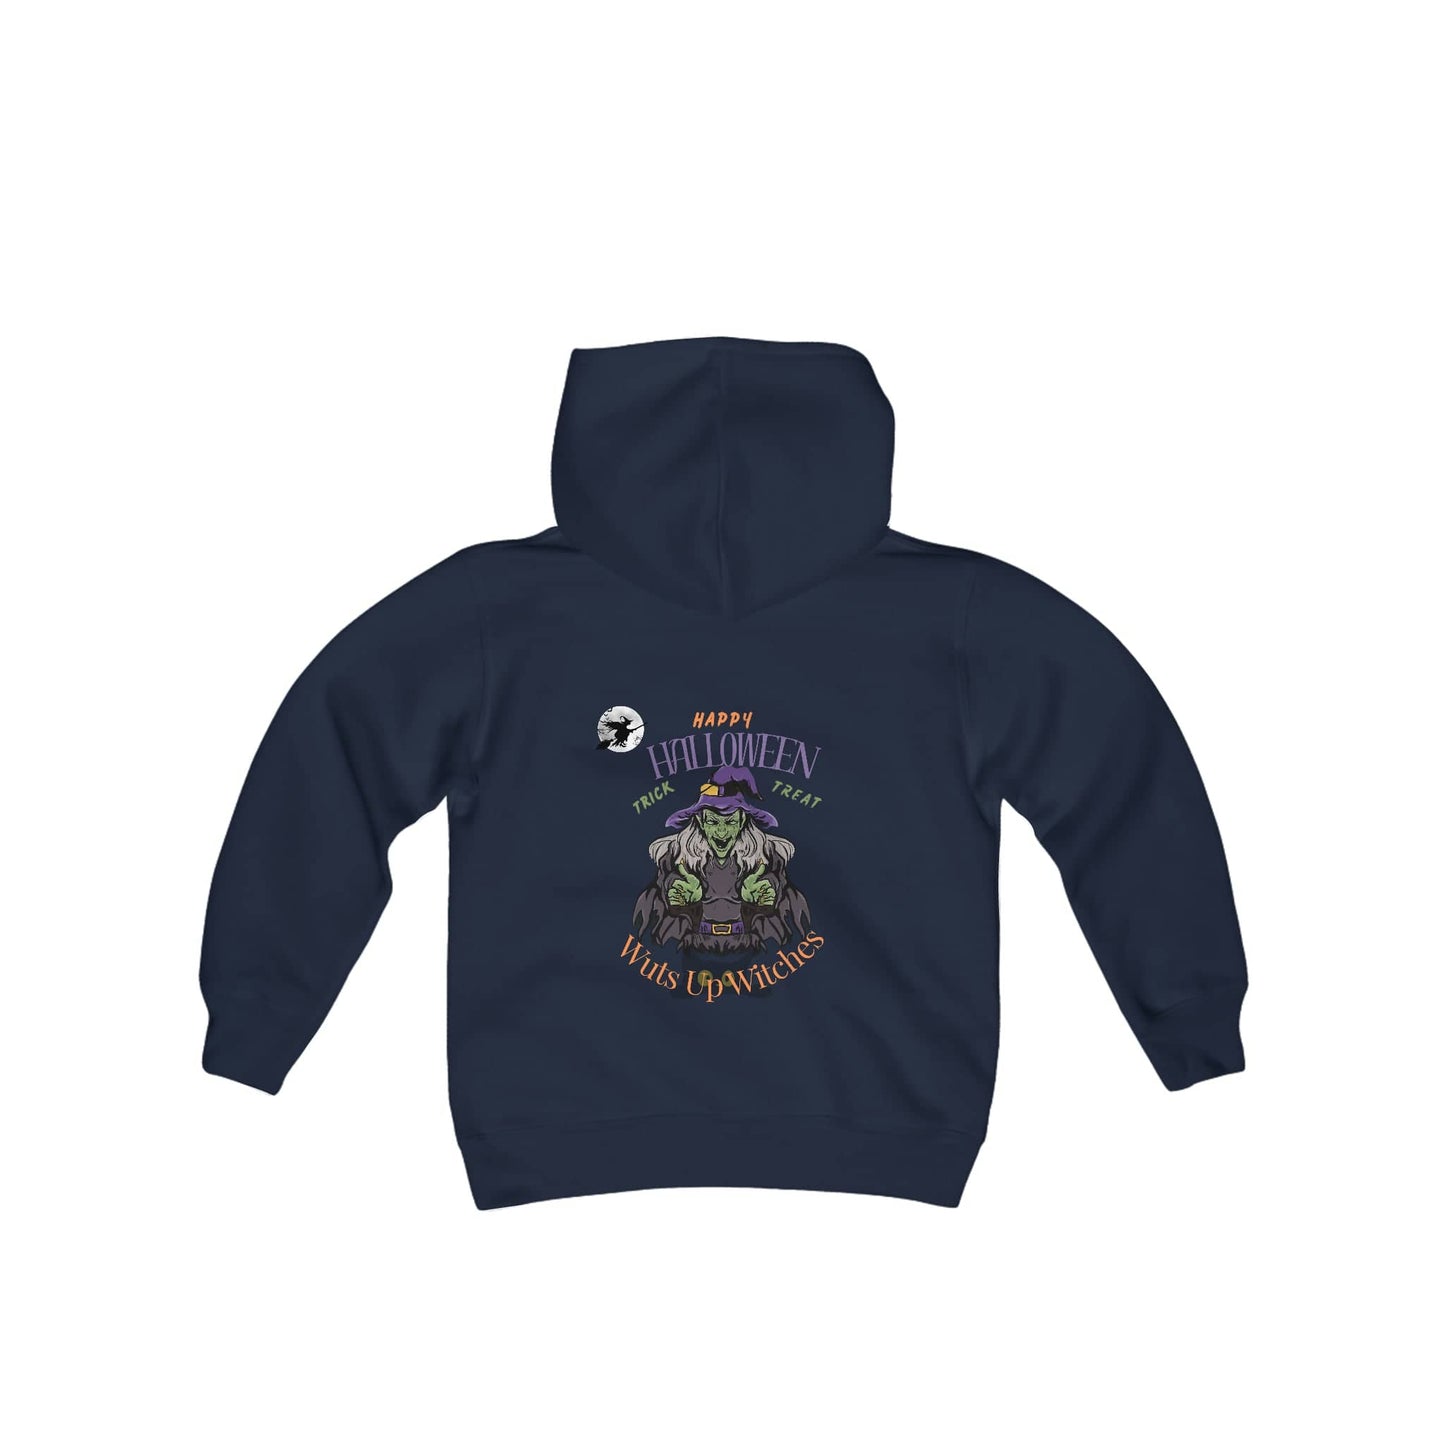 Wuts Up, Witches! Hoodie Kids clothes Bigger Than Life Navy S 